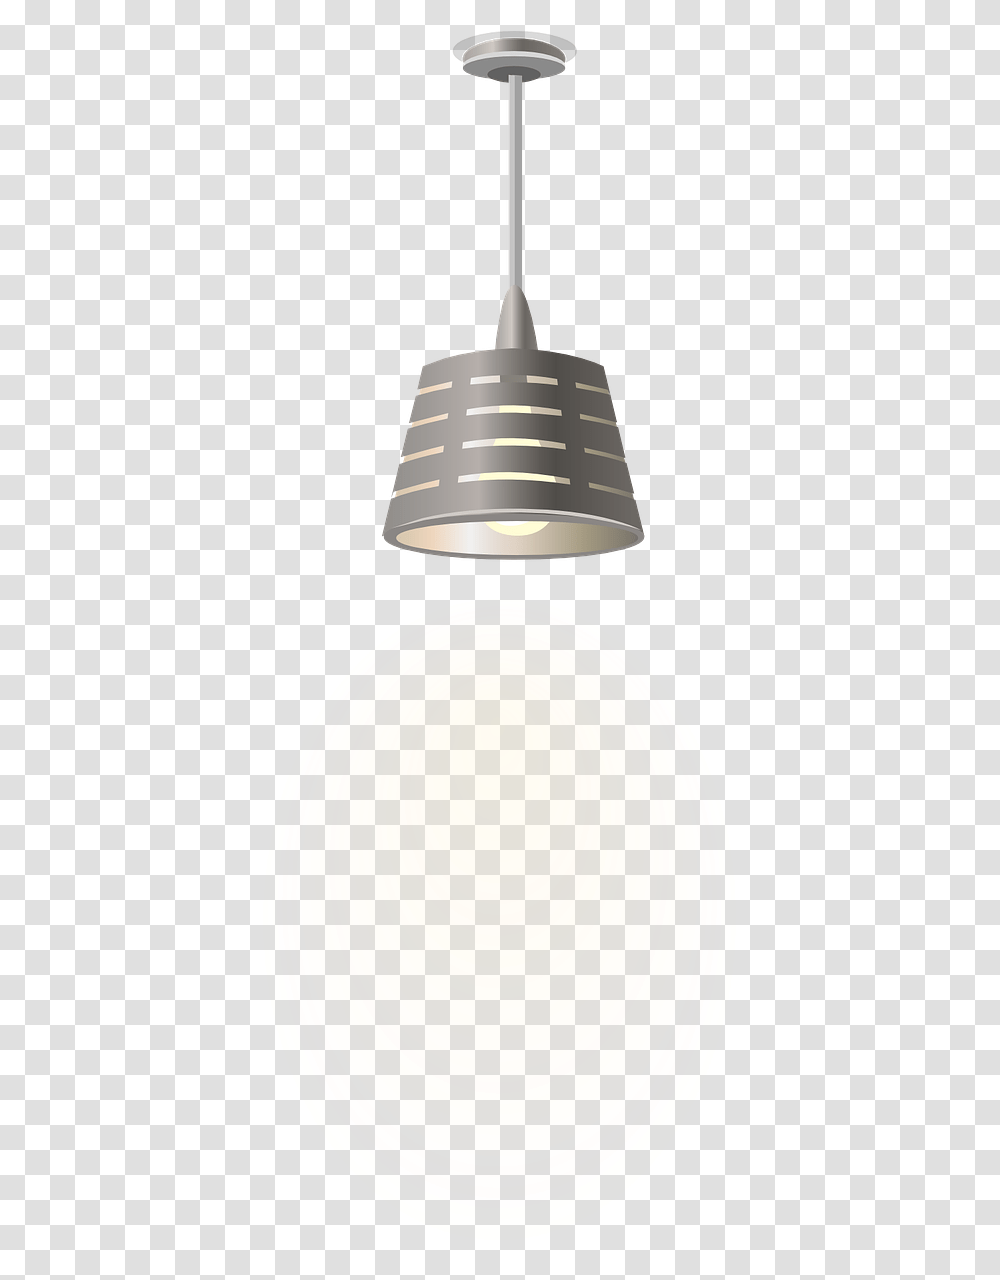 Light Lamp Lighting Free Photo Ceiling Light Vector, Lampshade, Can, Spotlight, LED Transparent Png